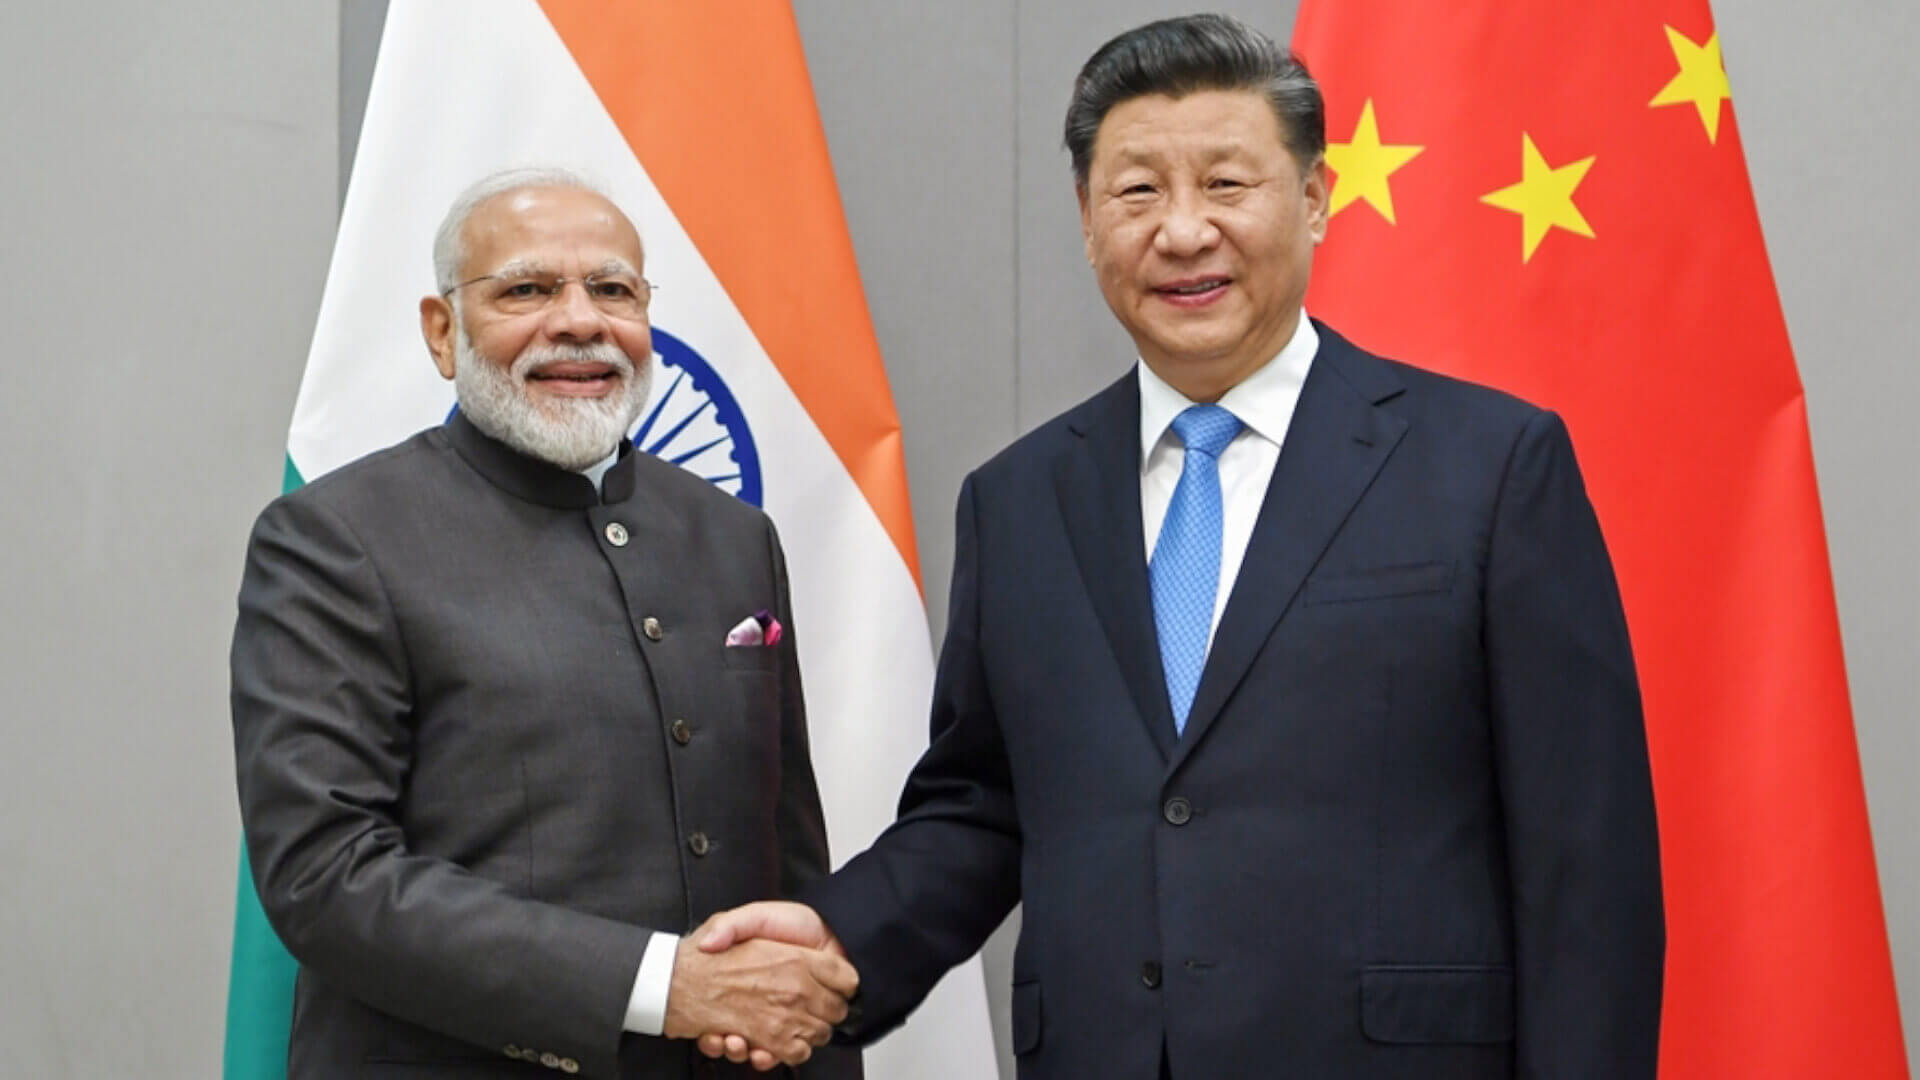 67% Indians Have Negative Views of China, Highest in History: Pew Survey